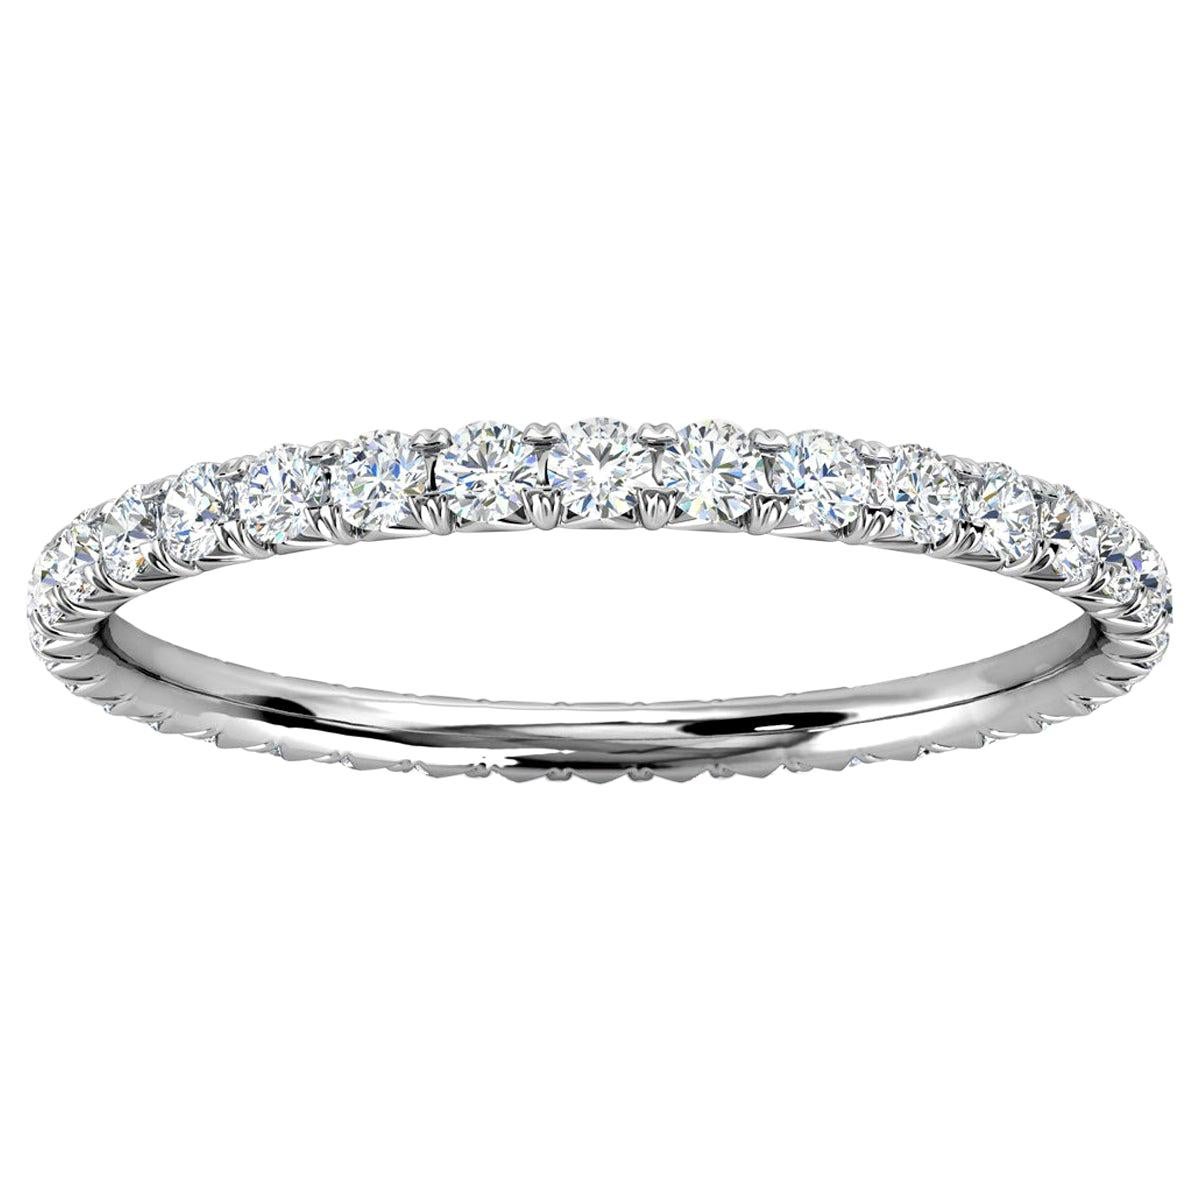 For Sale:  14K White Gold Mia French Pave Diamond Eternity Ring '1/2 Ct. Tw'